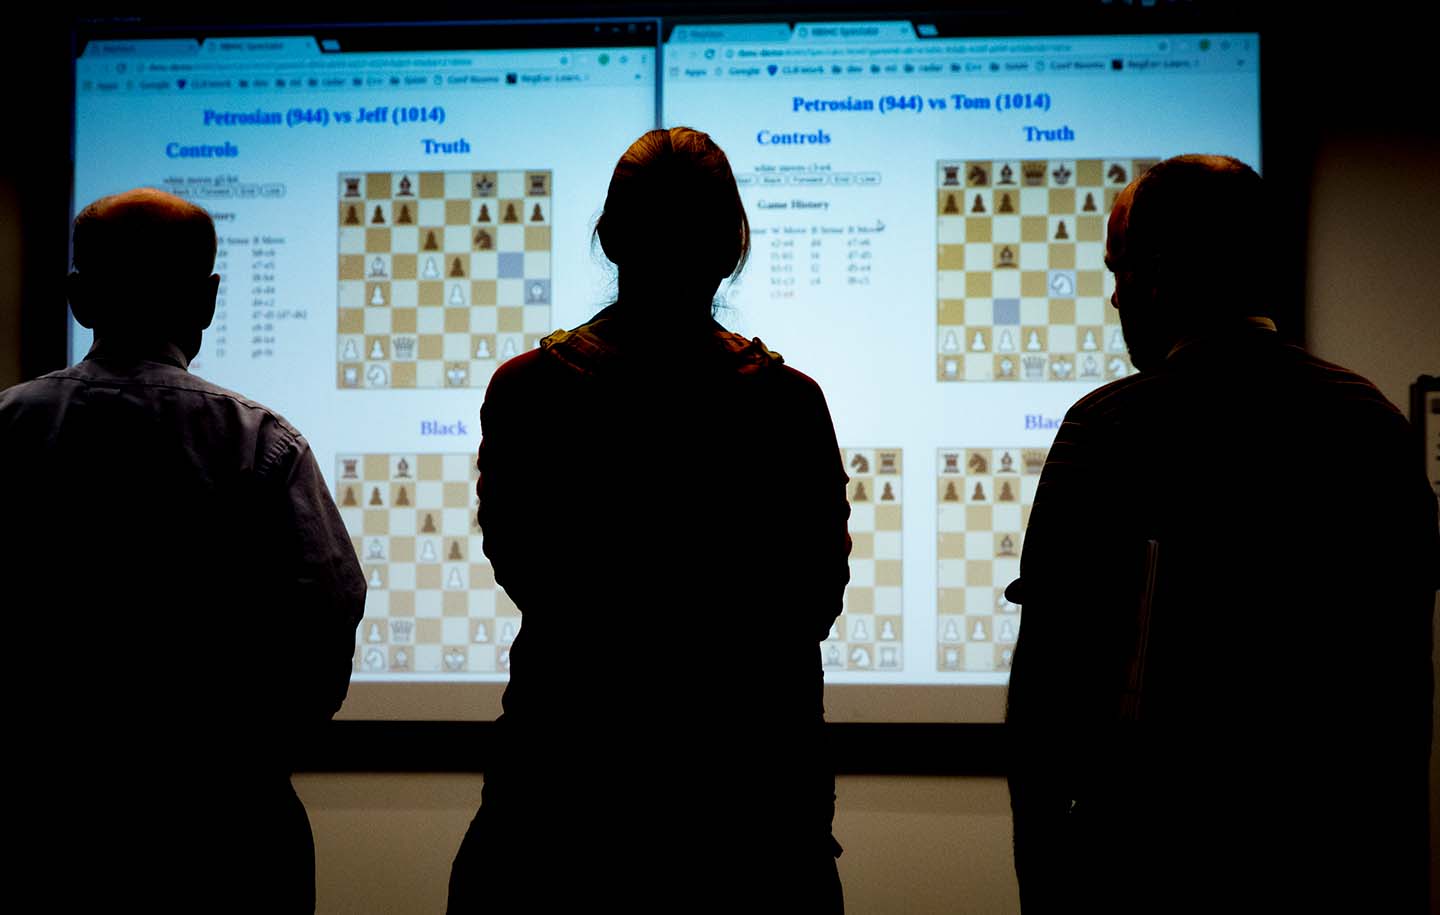 Participants in an internal Reconnaissance Chess Challenge at APL observe a player’s moves